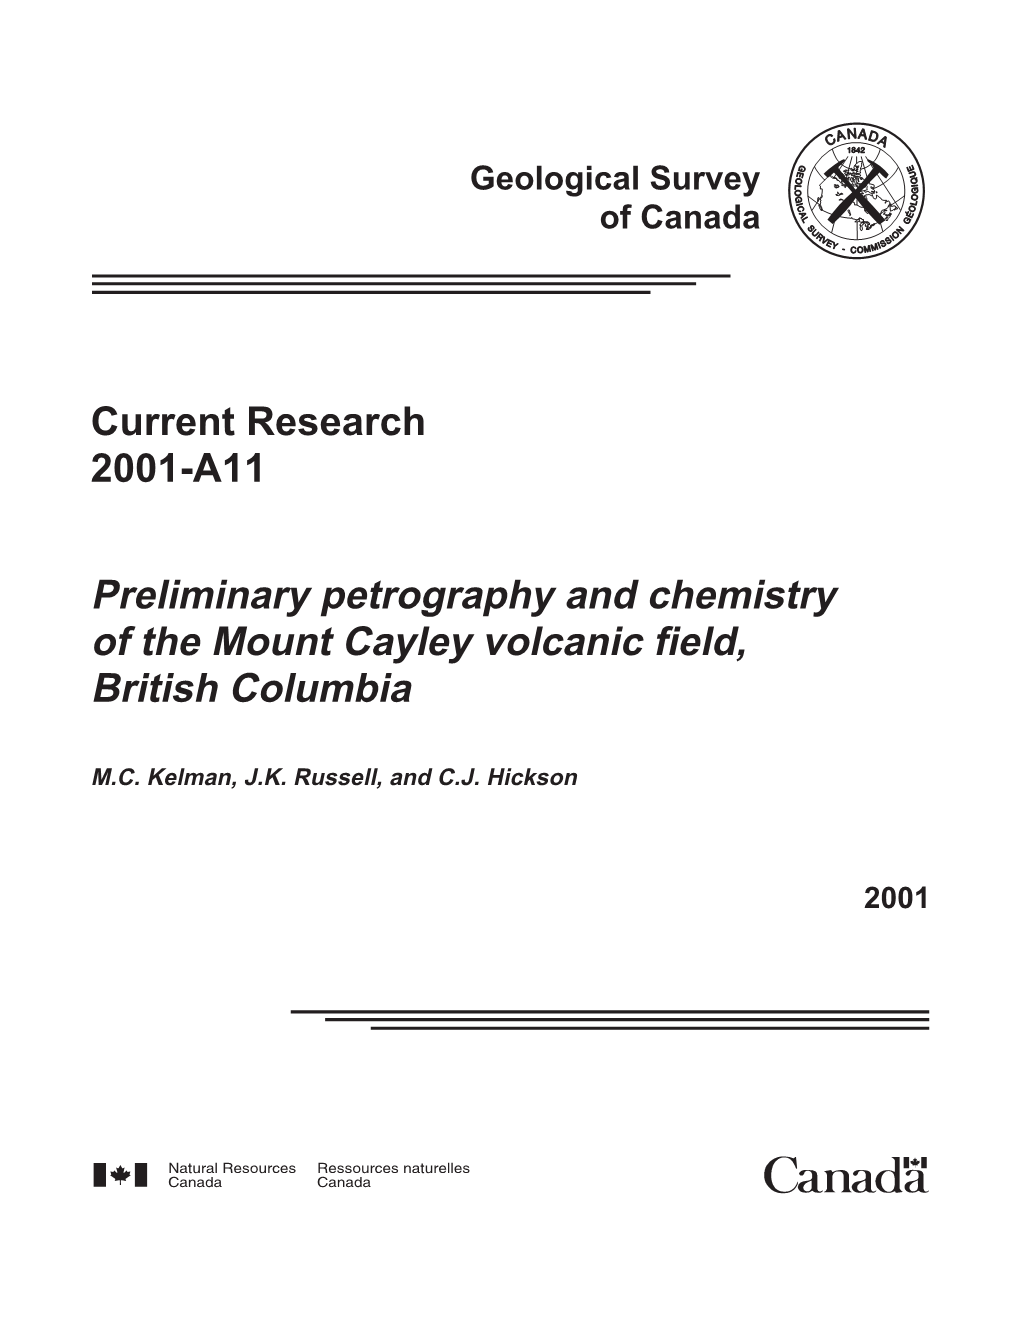 Preliminary Petrography and Chemistry of the Mount Cayley Volcanic Field, British Columbia